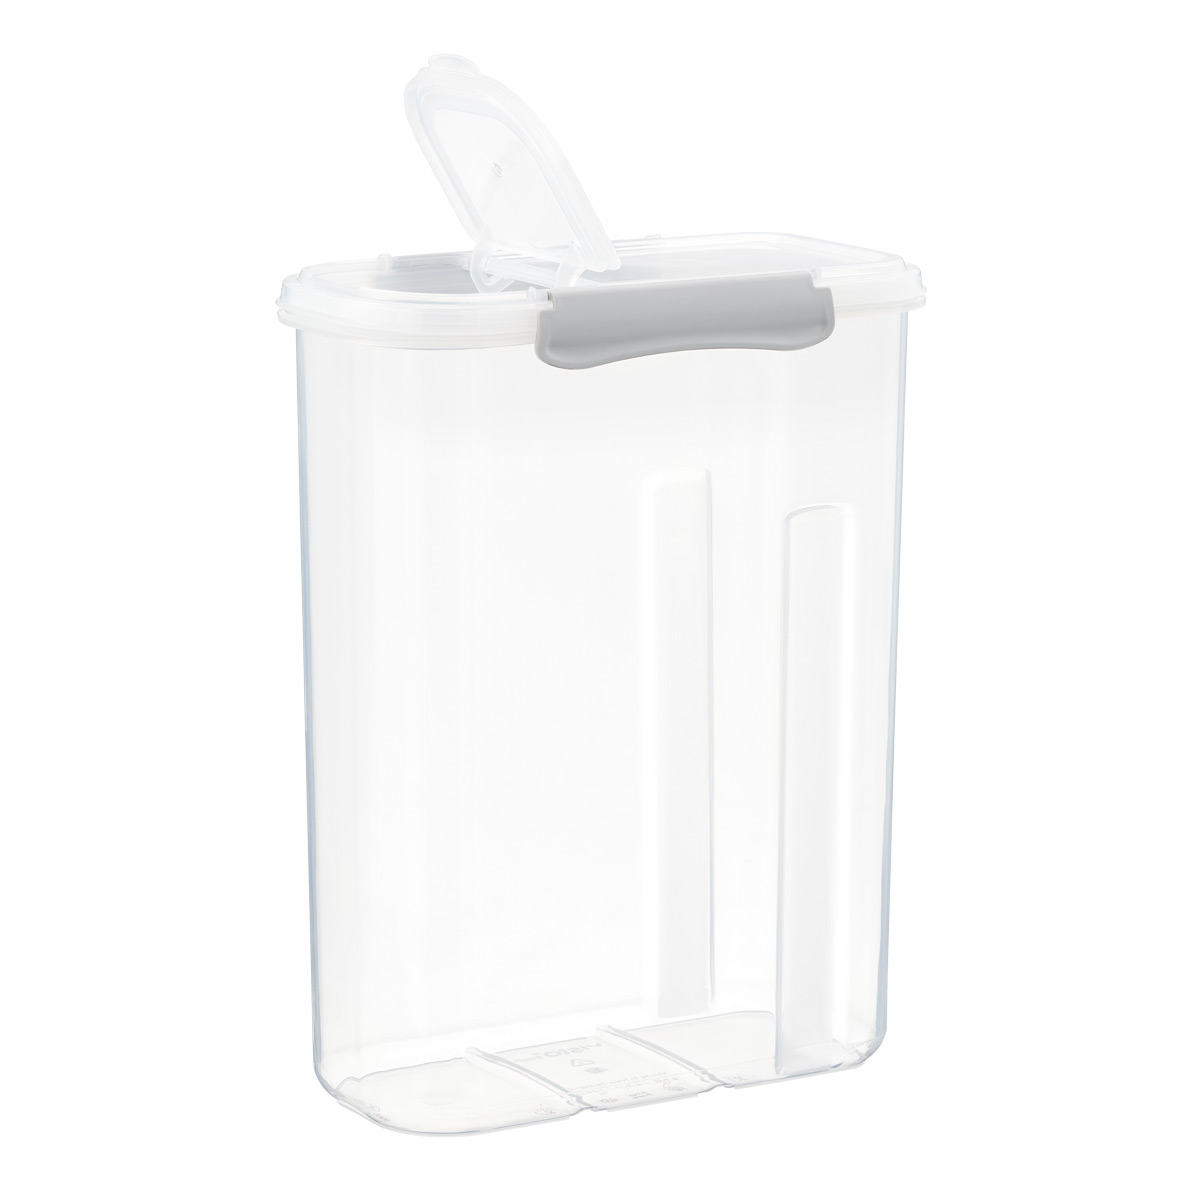 https://www.containerstore.com/catalogimages/438083/10083920_4.5_Qt_Cereal_Dispenser_Gre.jpg